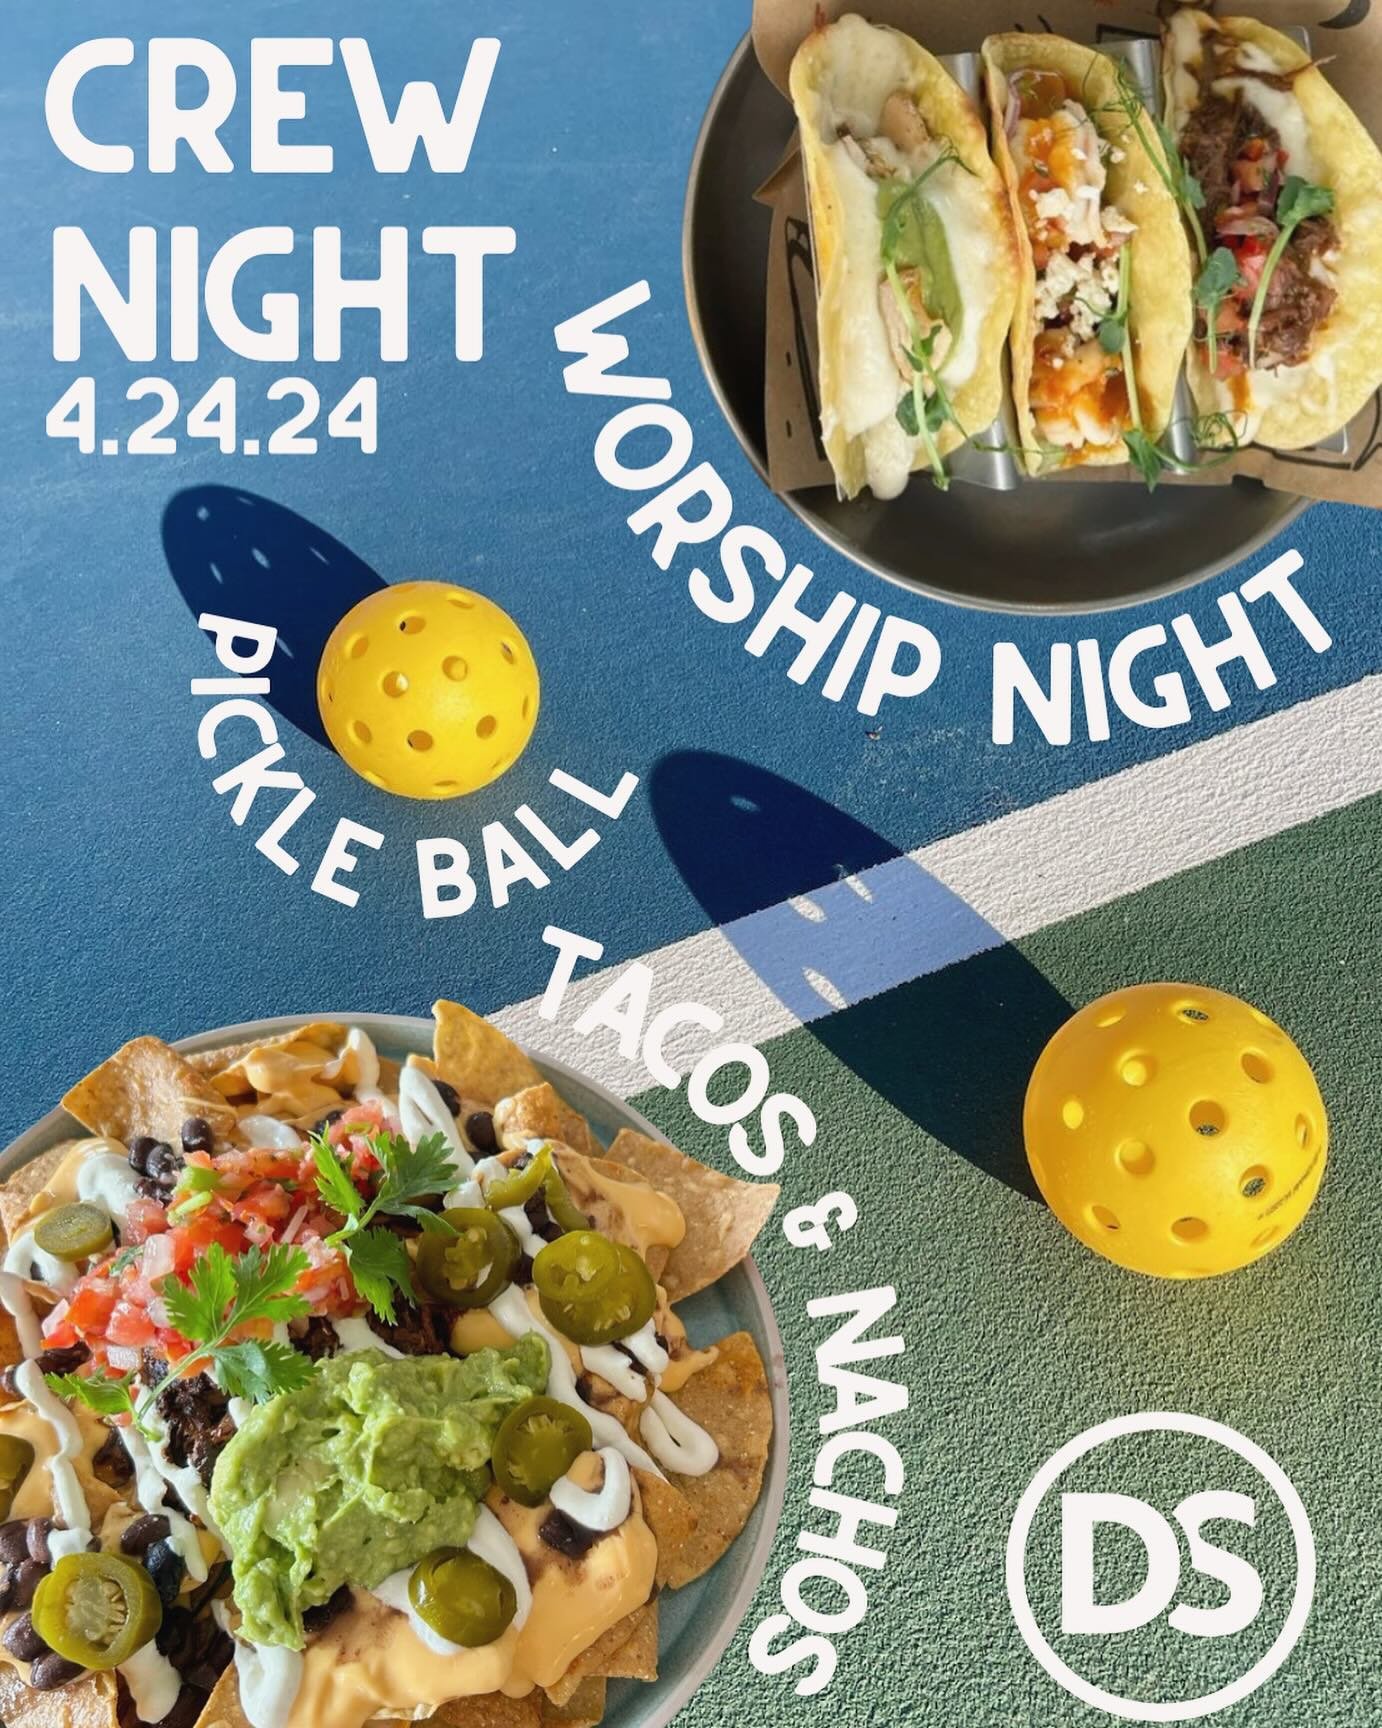 CREW NIGHT IS TONIGHT!!! We&rsquo;ve got GREAT worship, GOOD food, and a FUN pickleball tournament all for you students!! Bring your friends, see you at 5:30 🫣